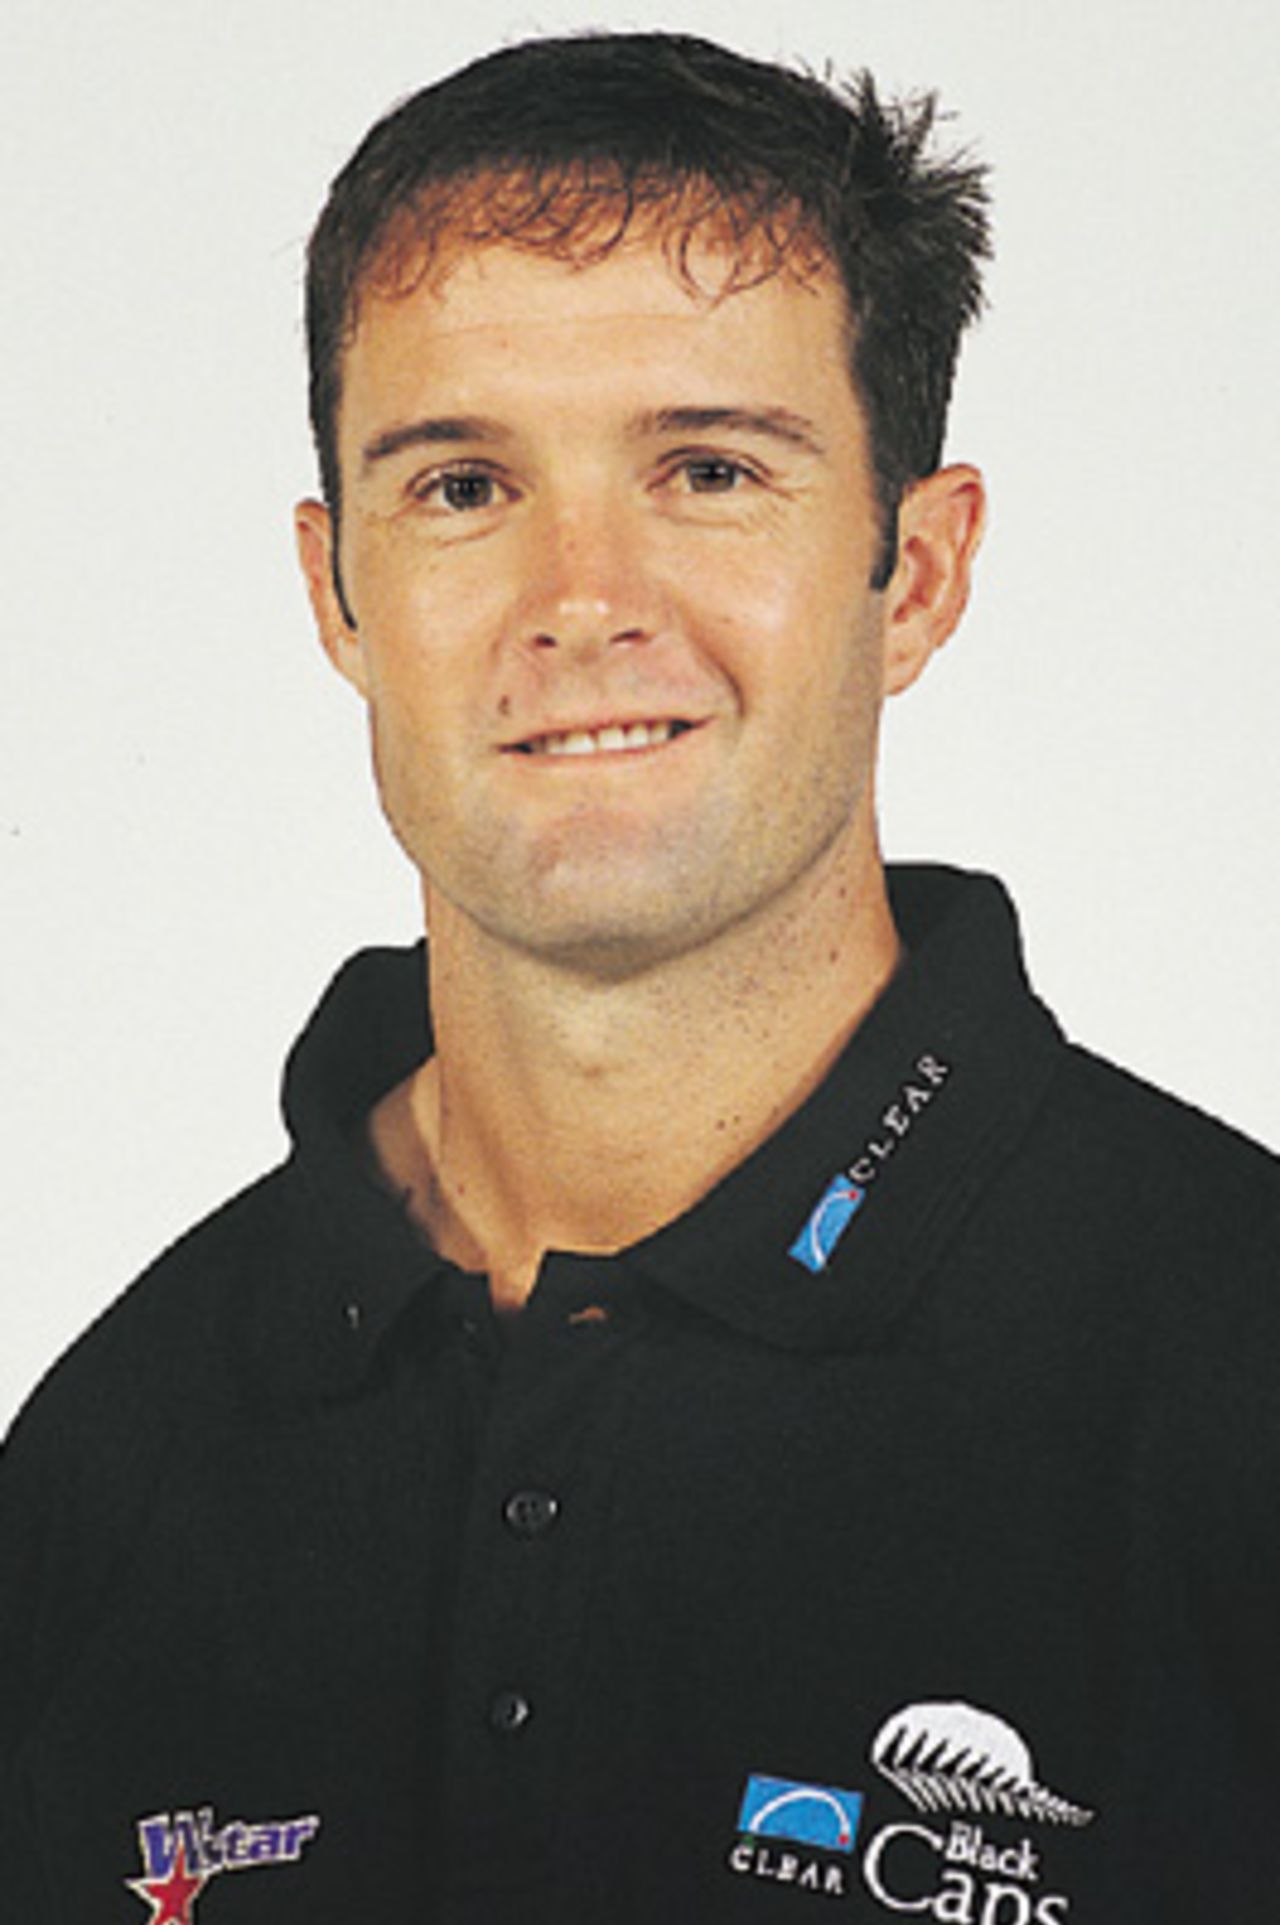 Portrait of Nathan Astle - New Zealand player in the 2000/01 season